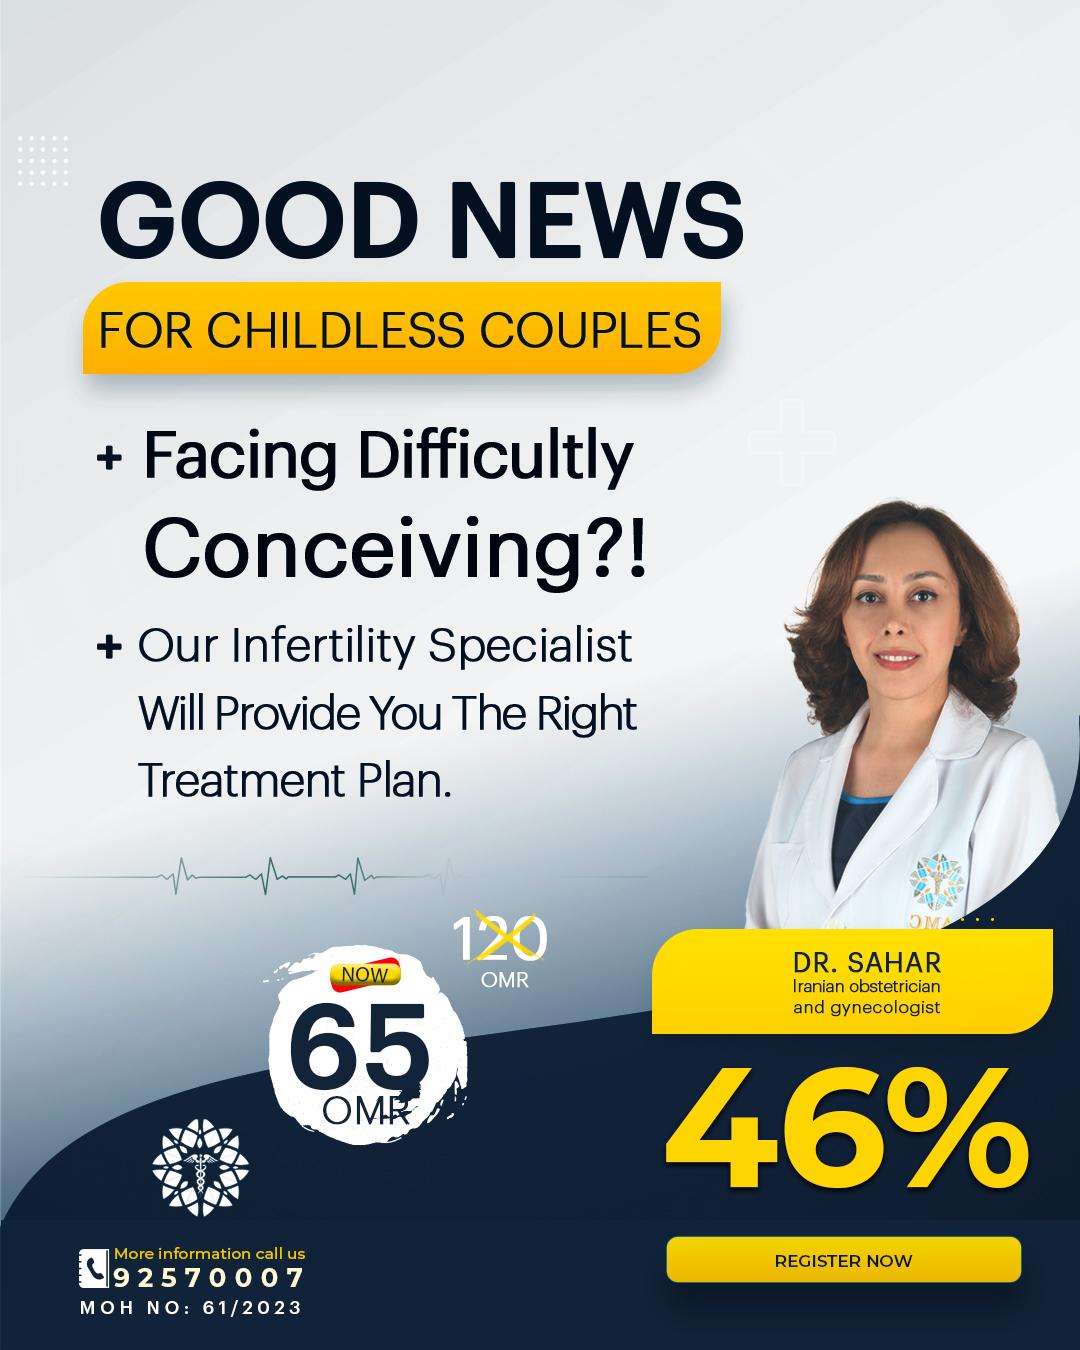 Facing Difficultly Conceiving?